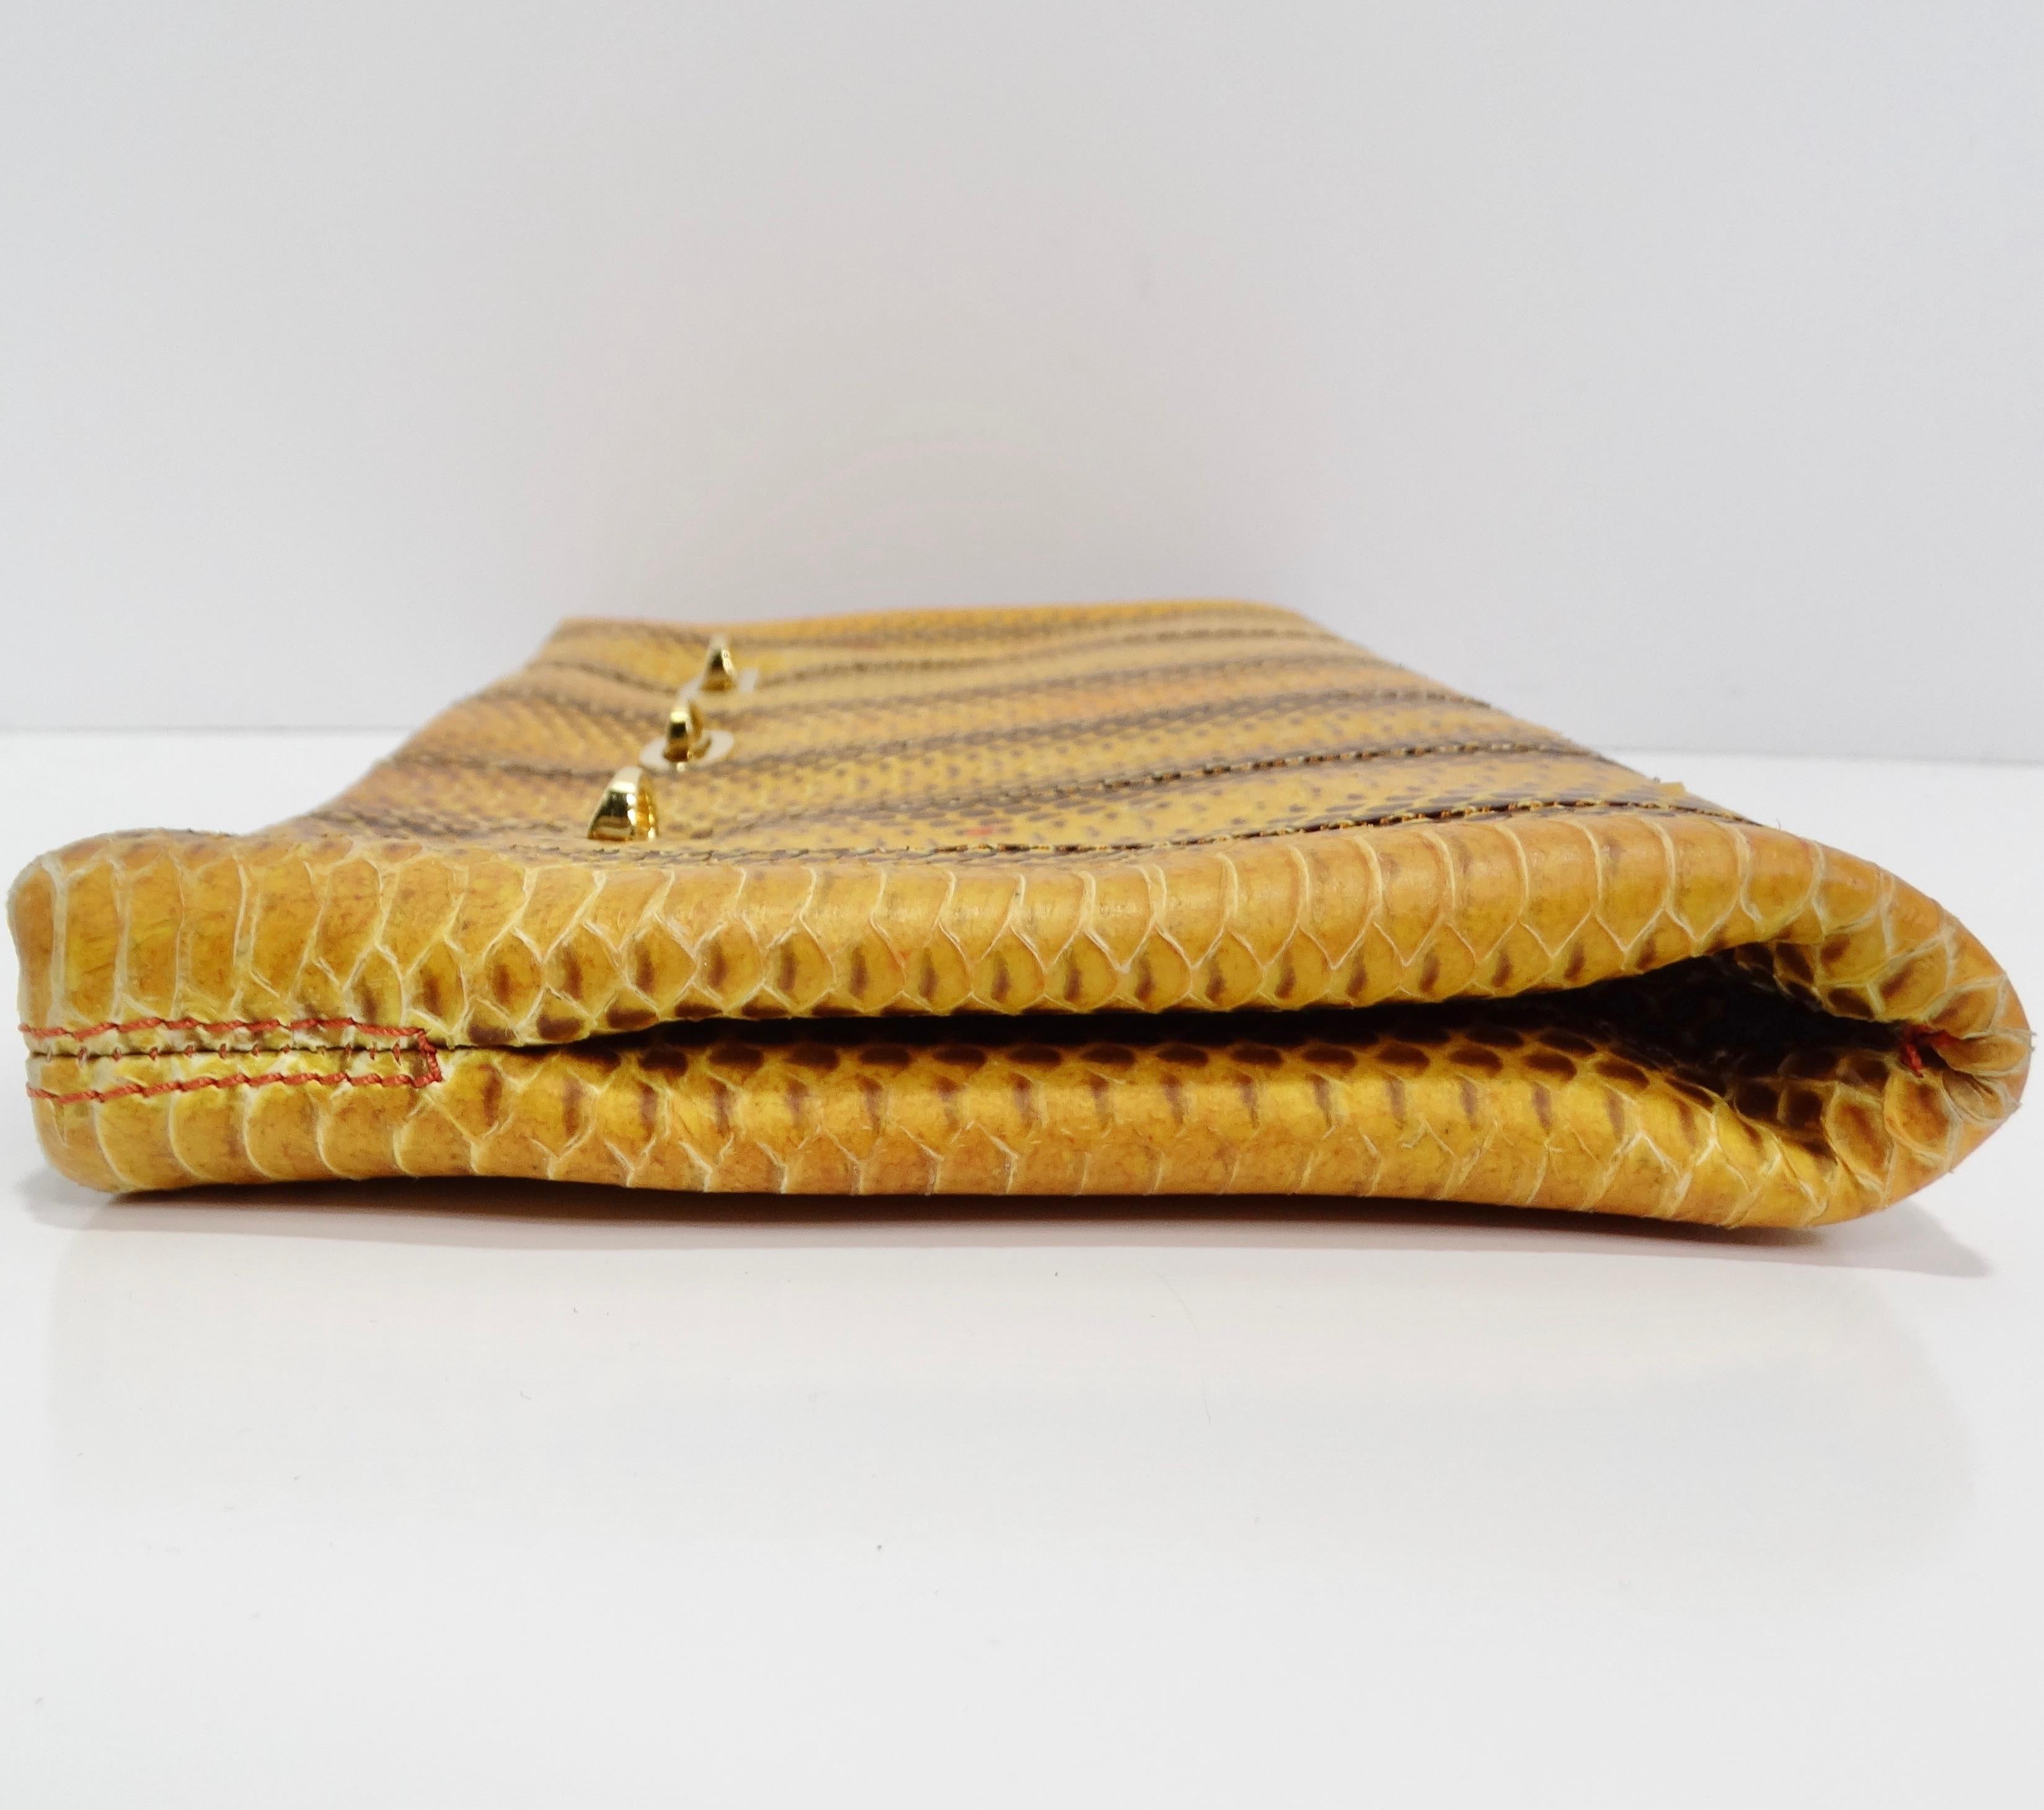 VBH 1980s Yellow Snakeskin Embossed Leather Clutch In Excellent Condition For Sale In Scottsdale, AZ